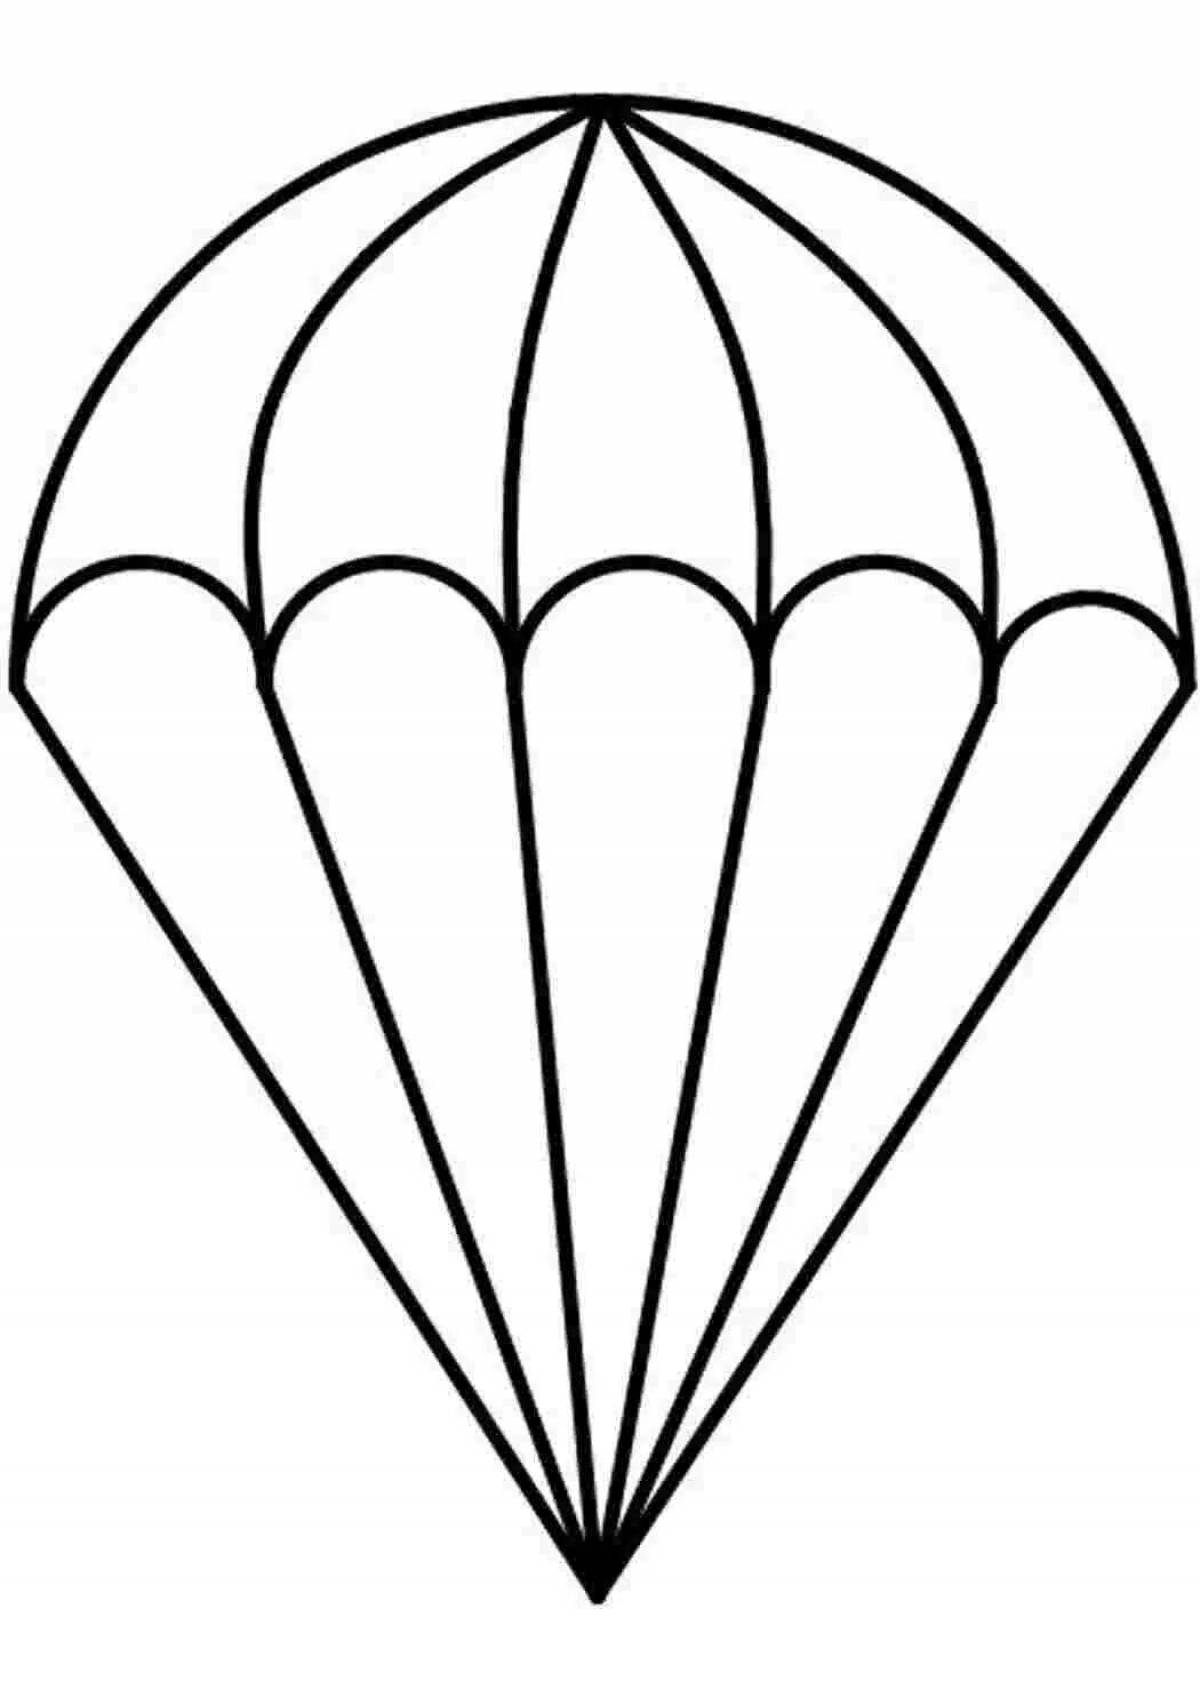 Animated skydivers coloring page for kids